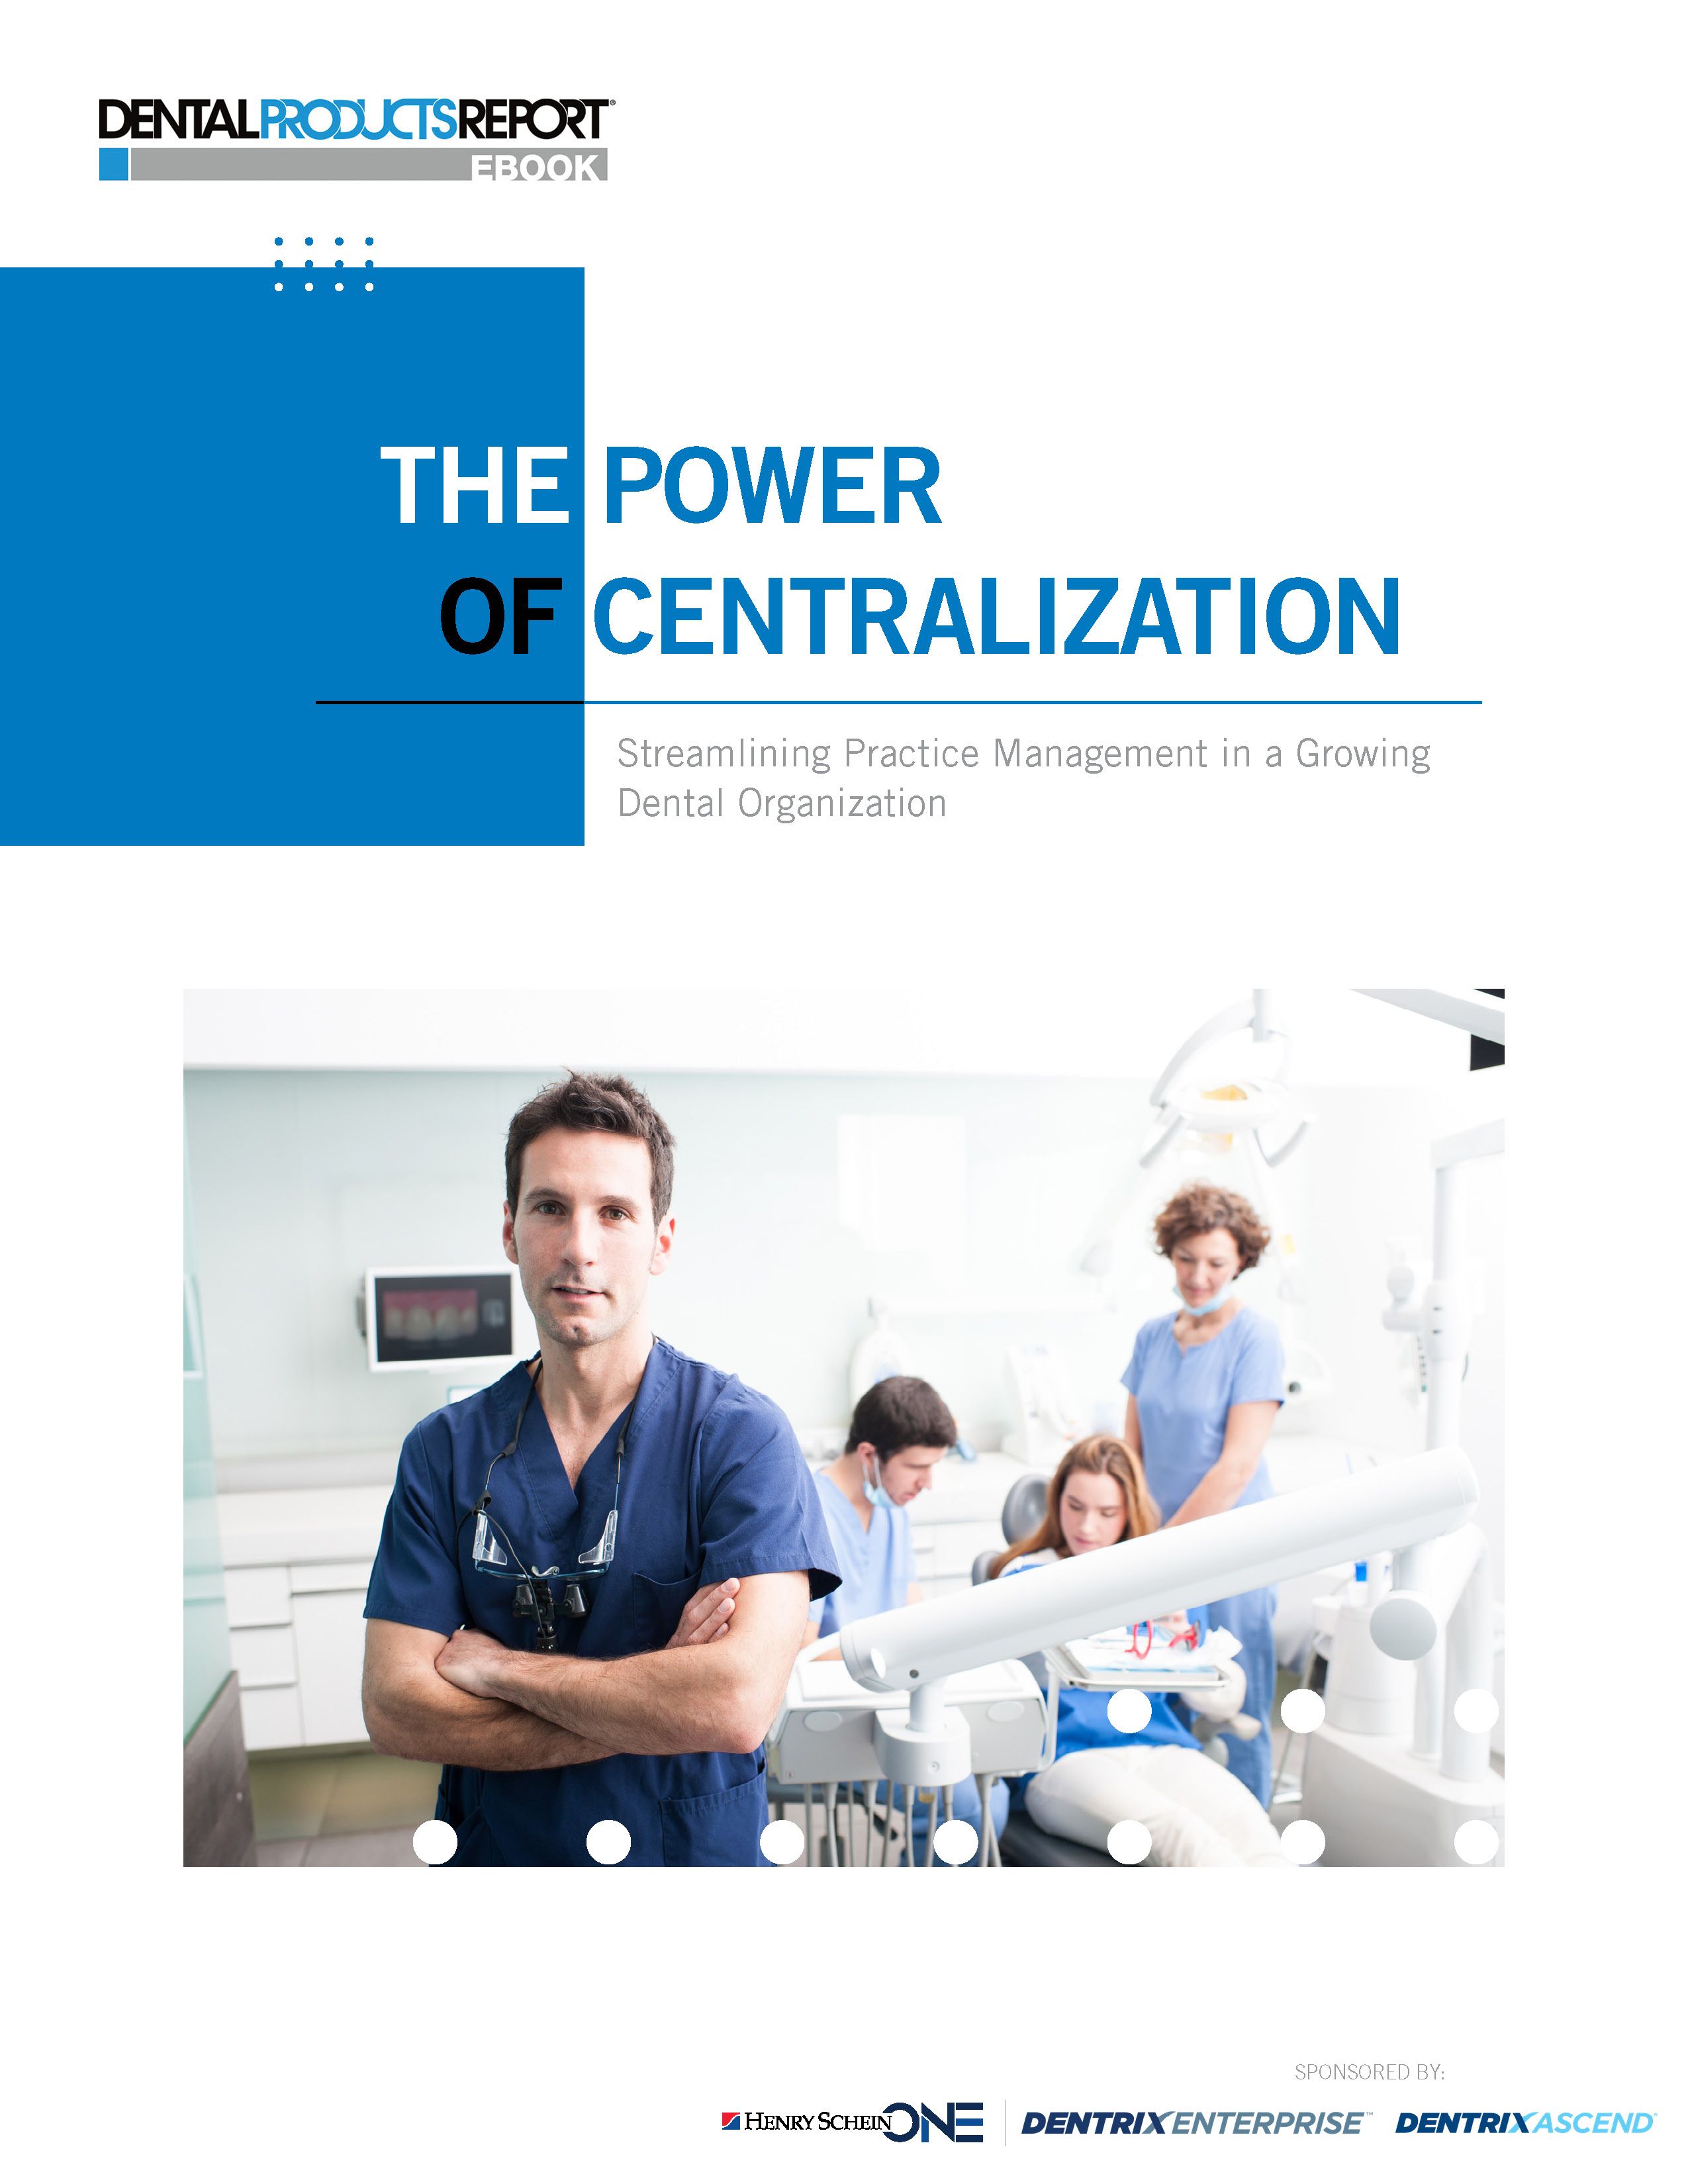 The Power of Centralization